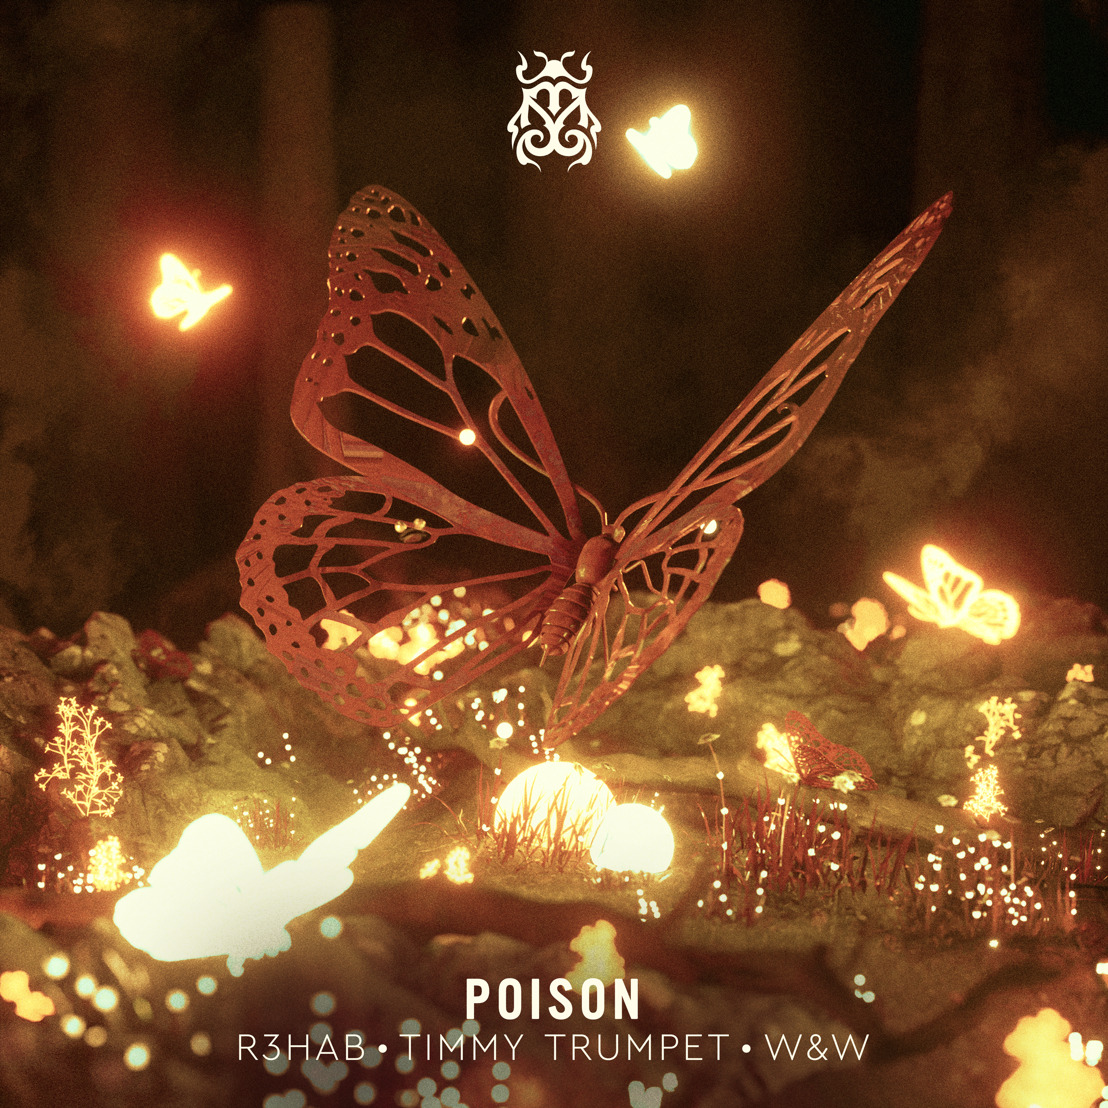 Powerhouse producers R3HAB, Timmy Trumpet, and W&W combine forces on dancefloor filler 'Poison'